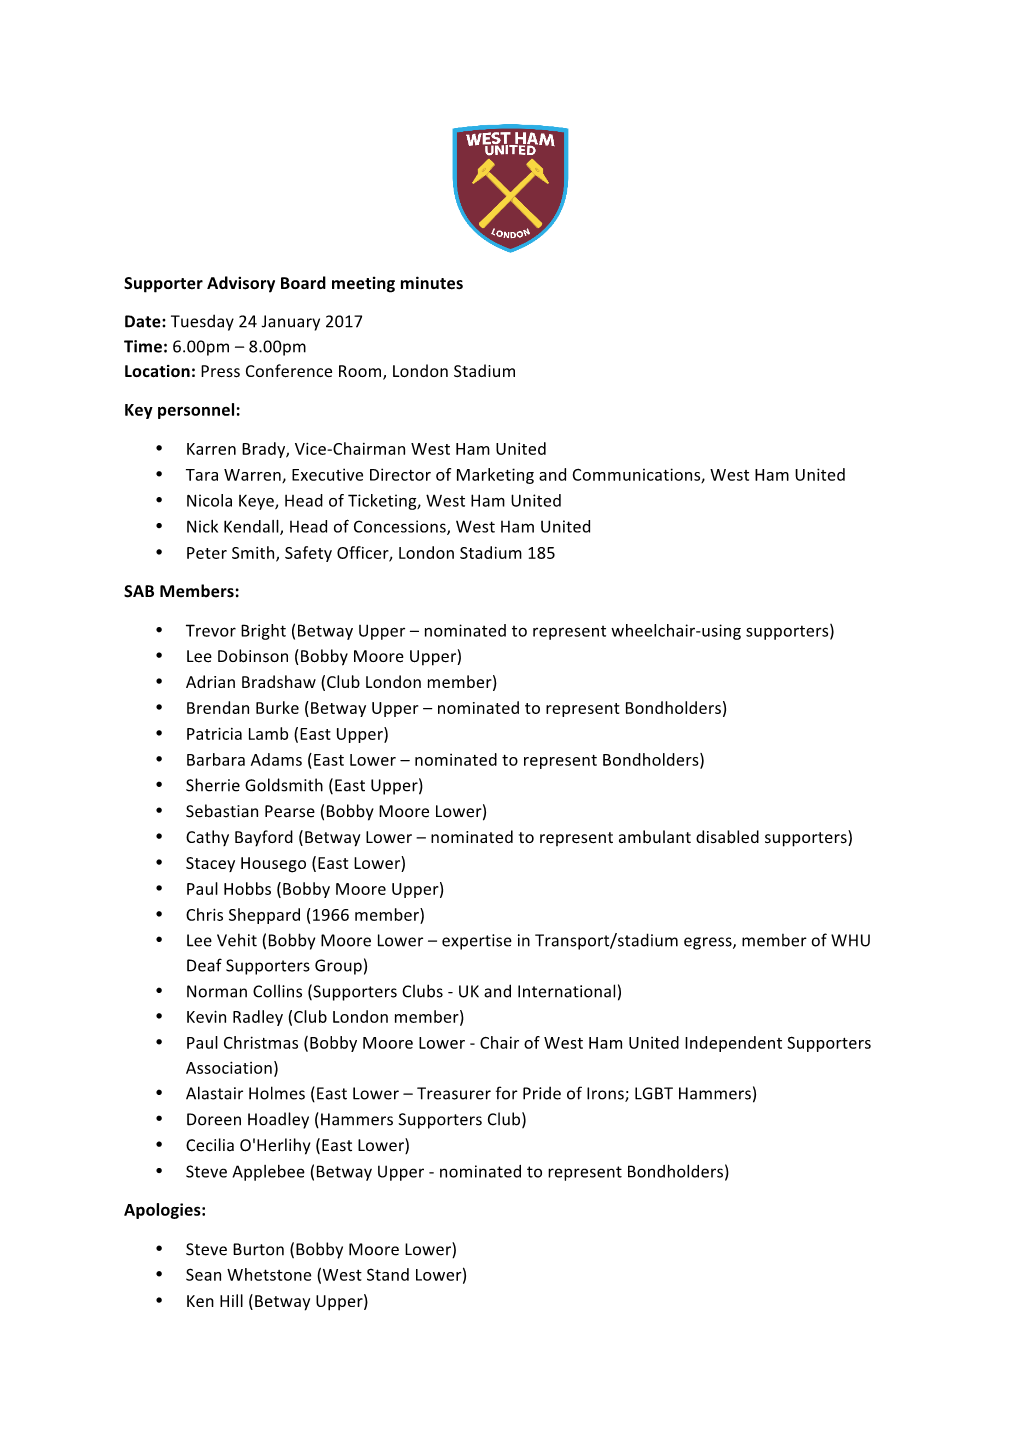 Supporter Advisory Board Meeting Minutes Date